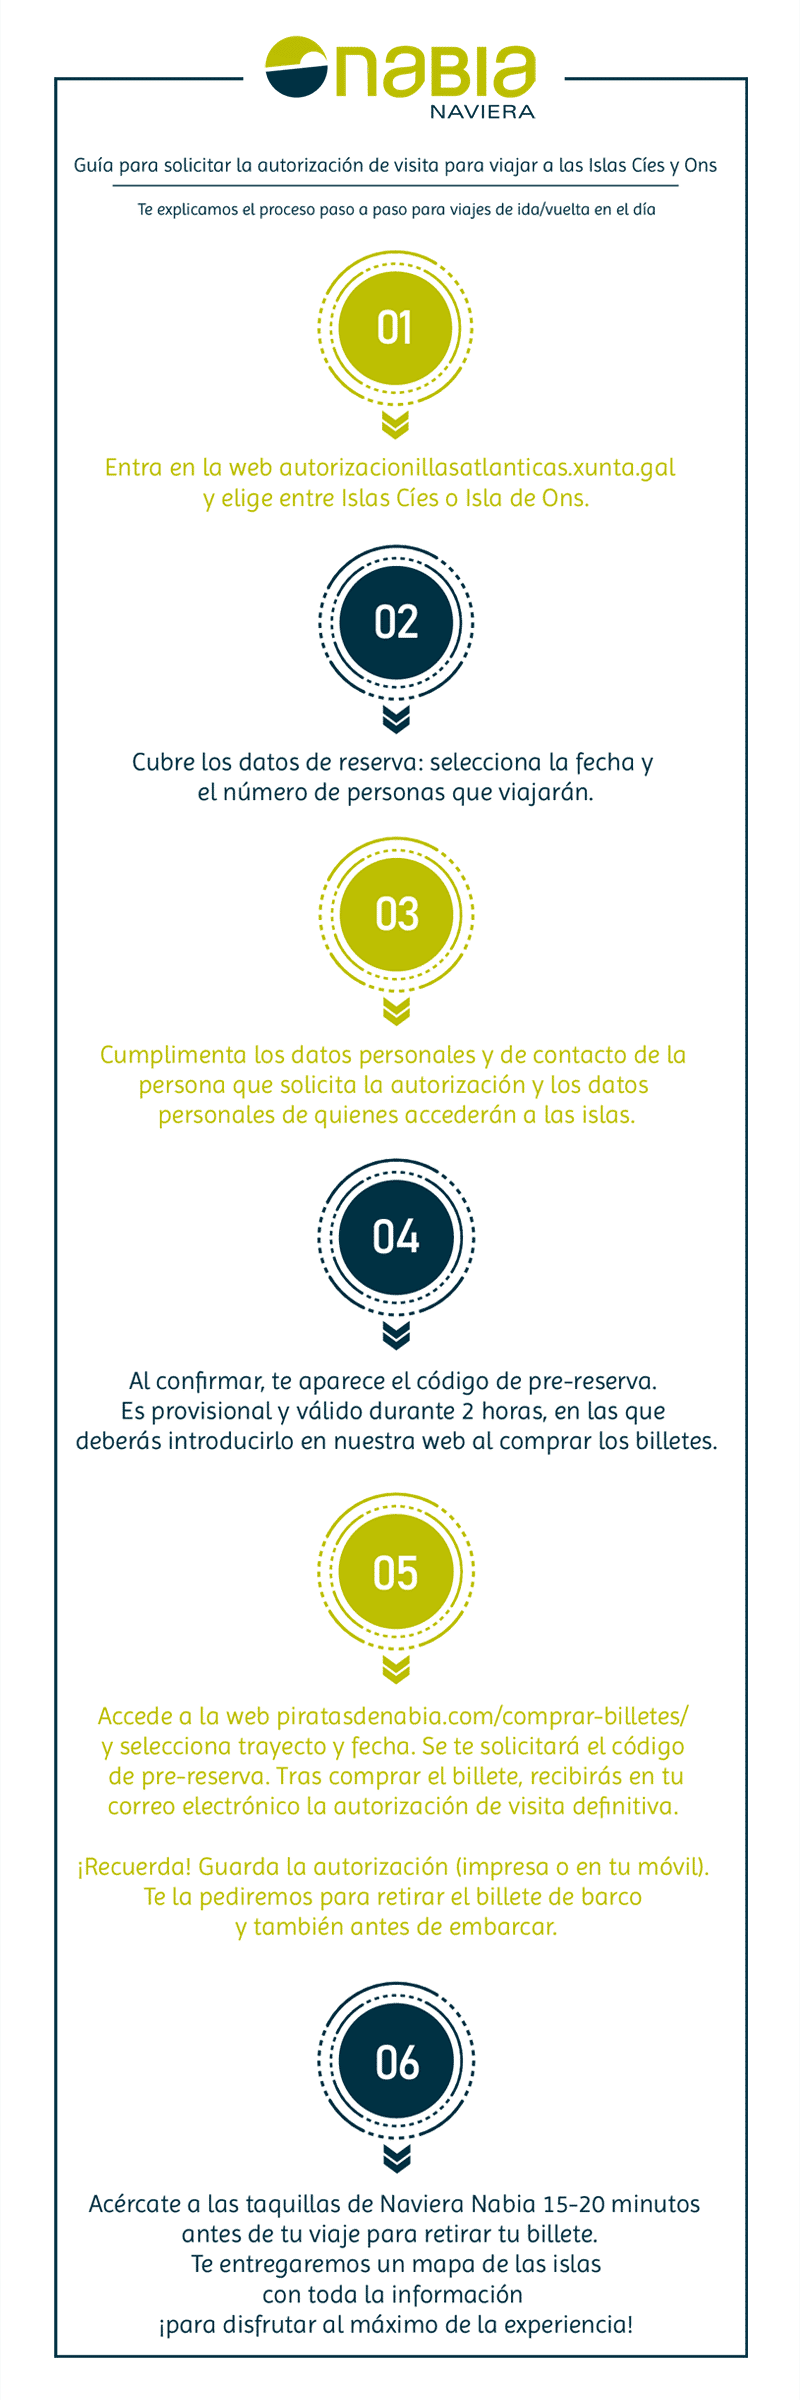 Infographic with the steps of the process to request authorization for Cíes and Ons Islands.